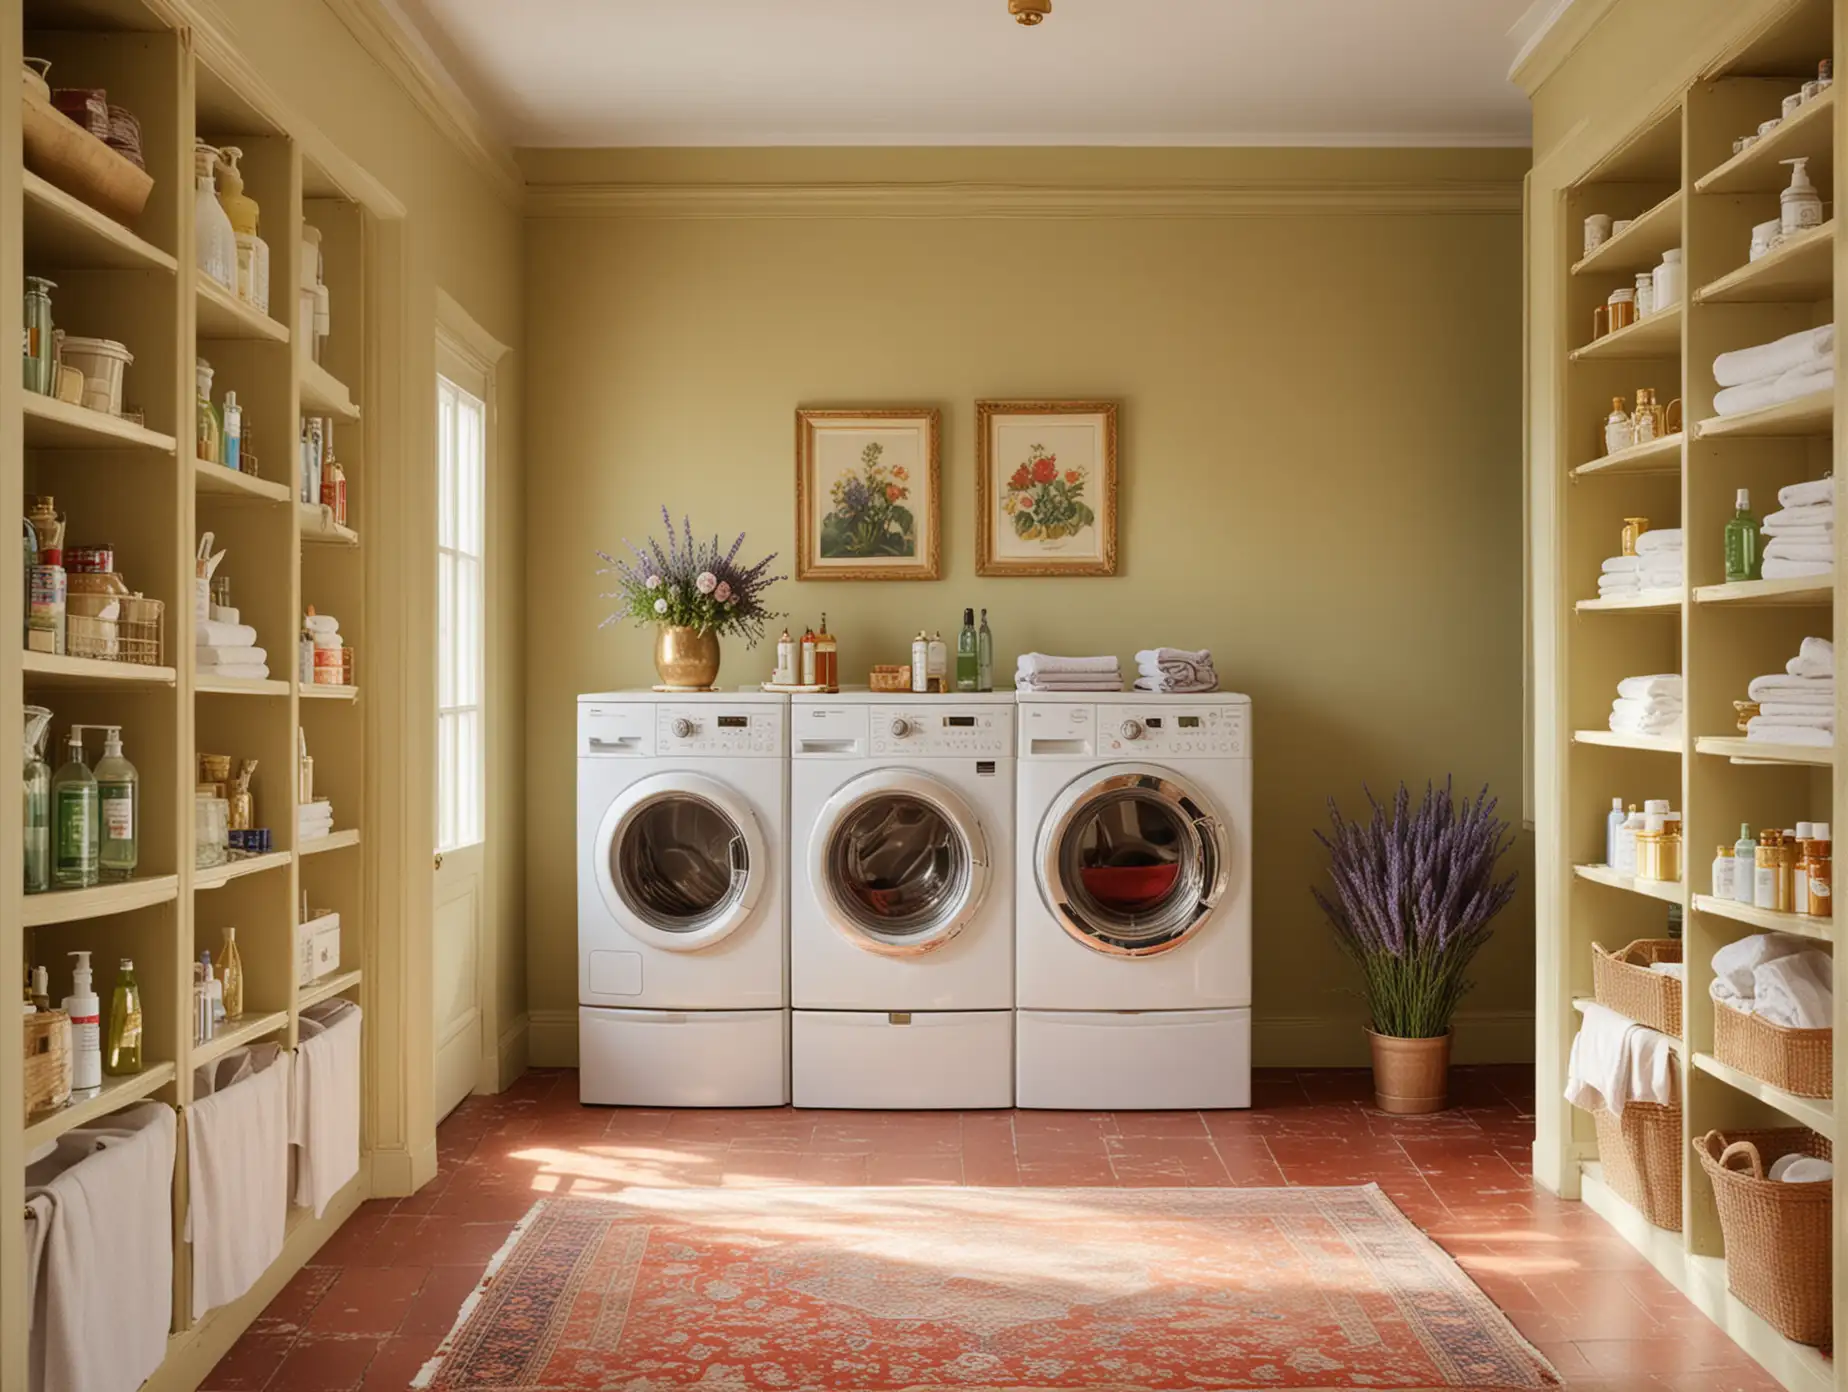 Luxurious-Laundry-Room-with-Lavender-Bouquet-and-Gold-Accents